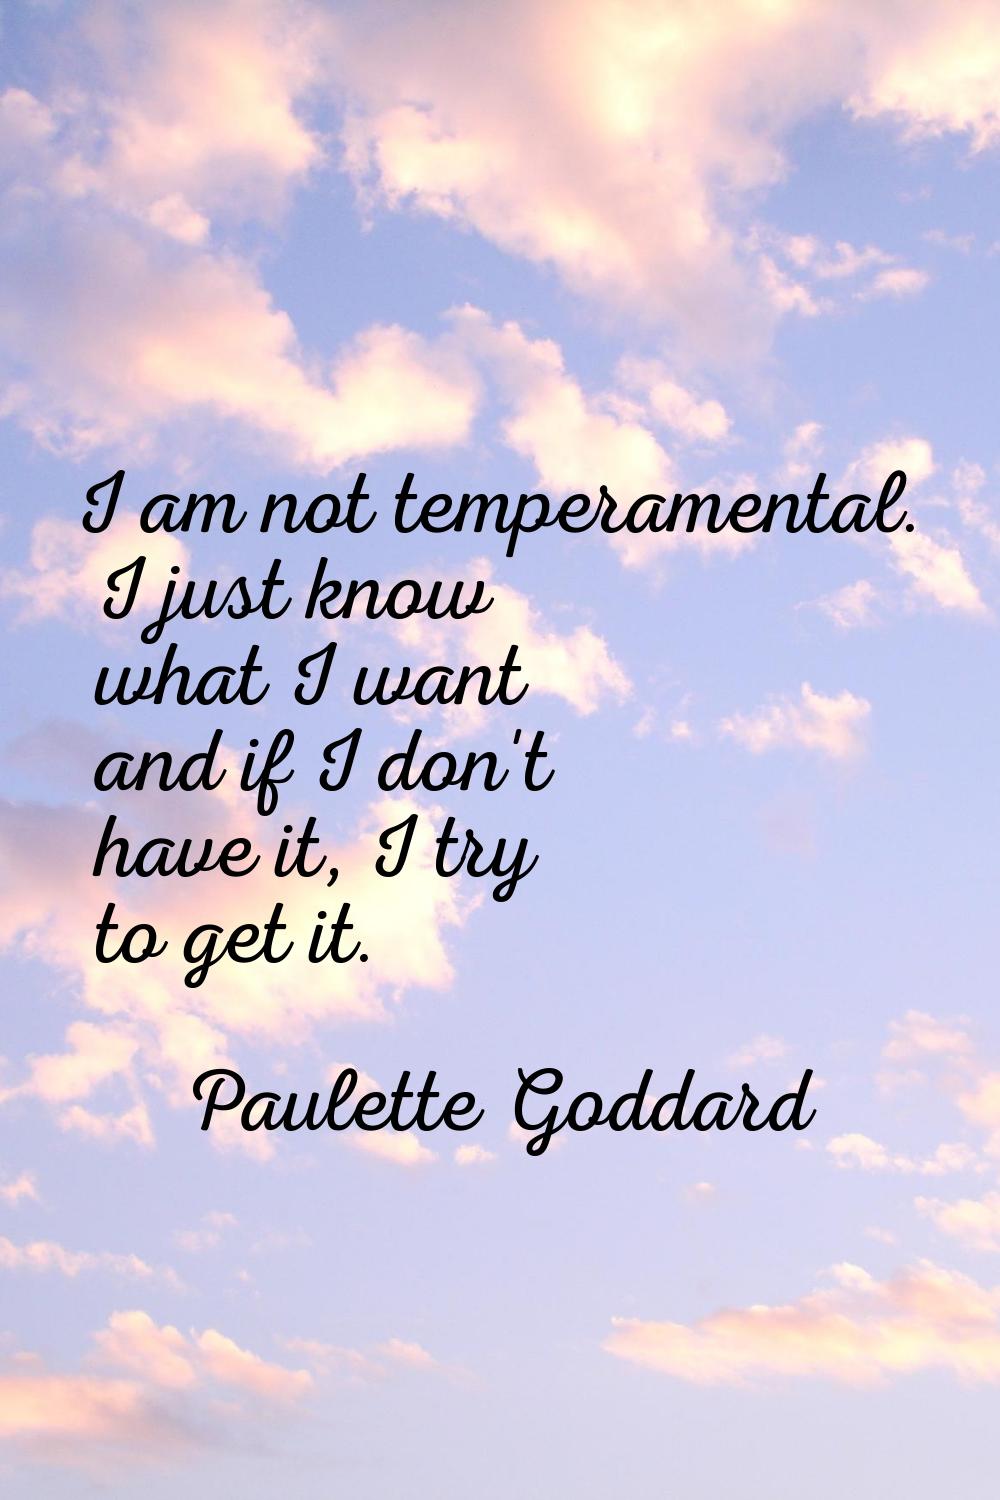 I am not temperamental. I just know what I want and if I don't have it, I try to get it.